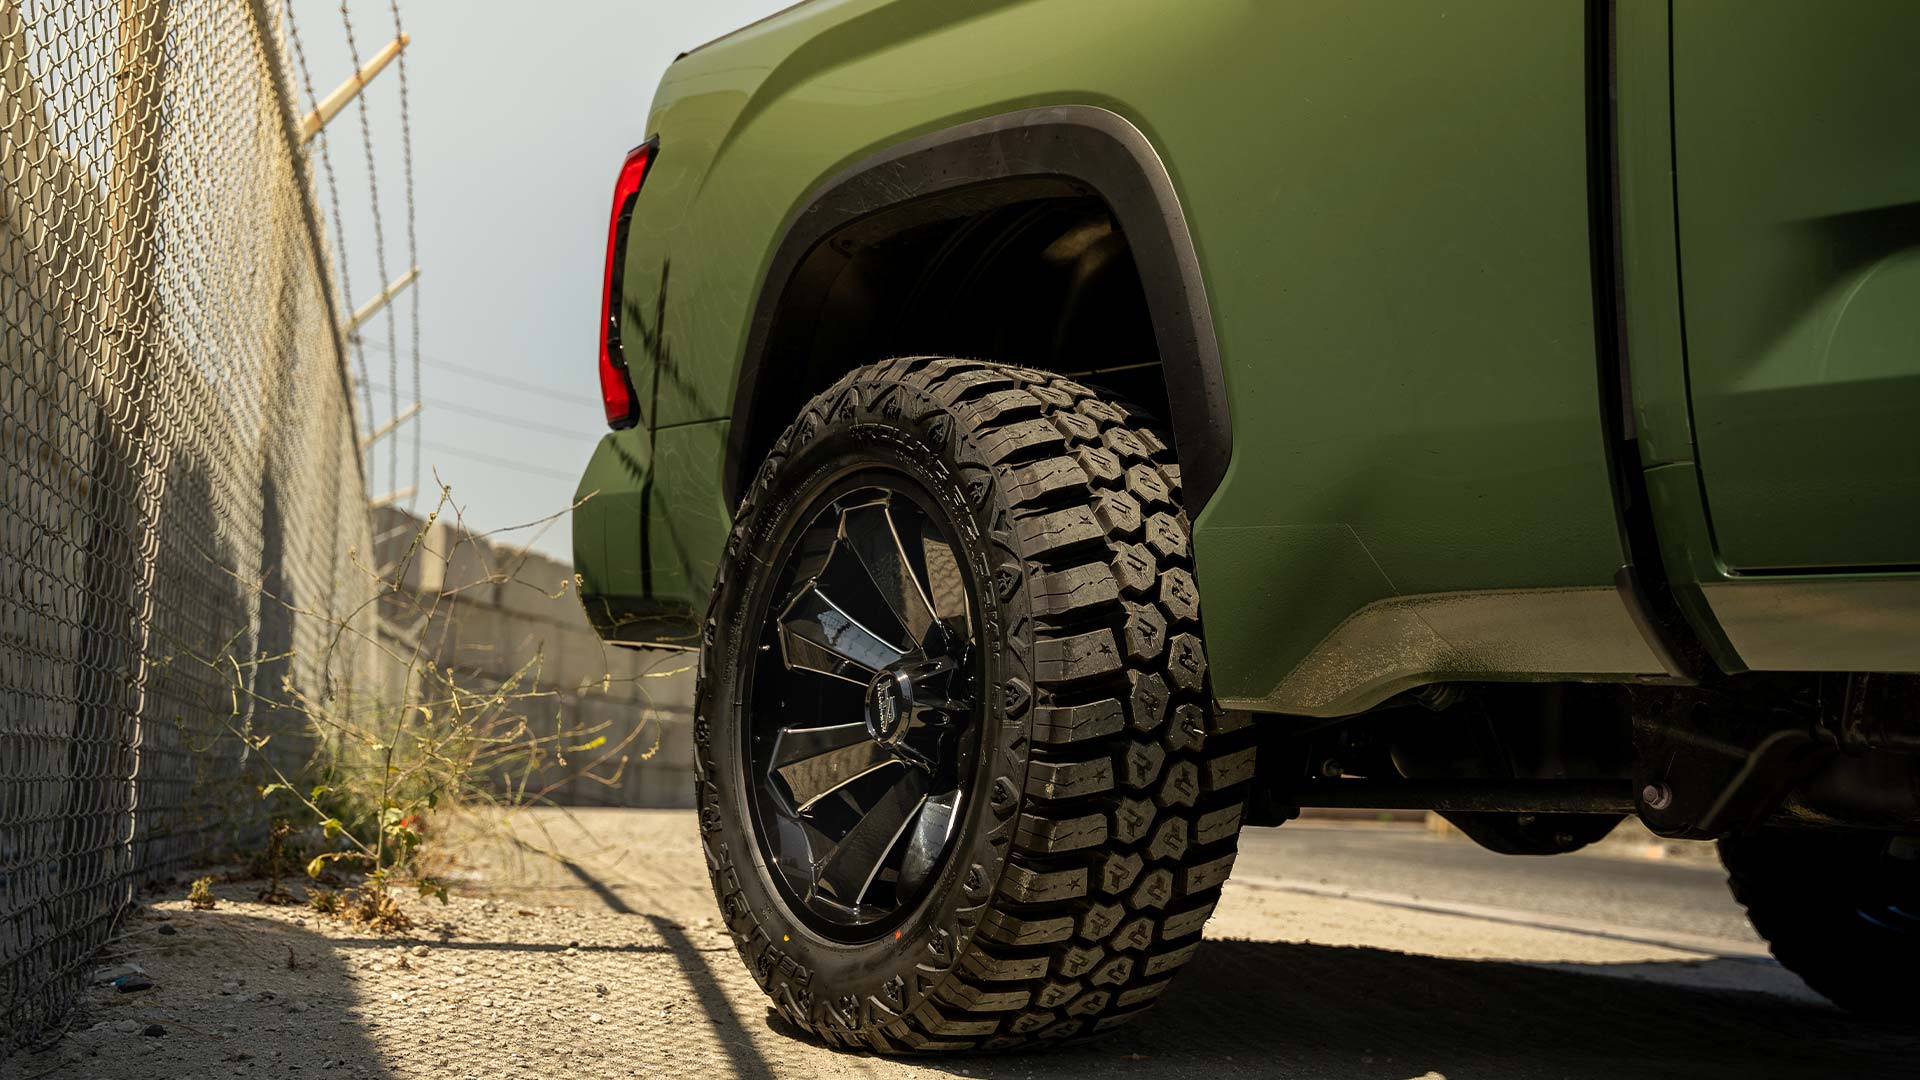 Army Green Toyota Tundra on 20x10 -19 H506's